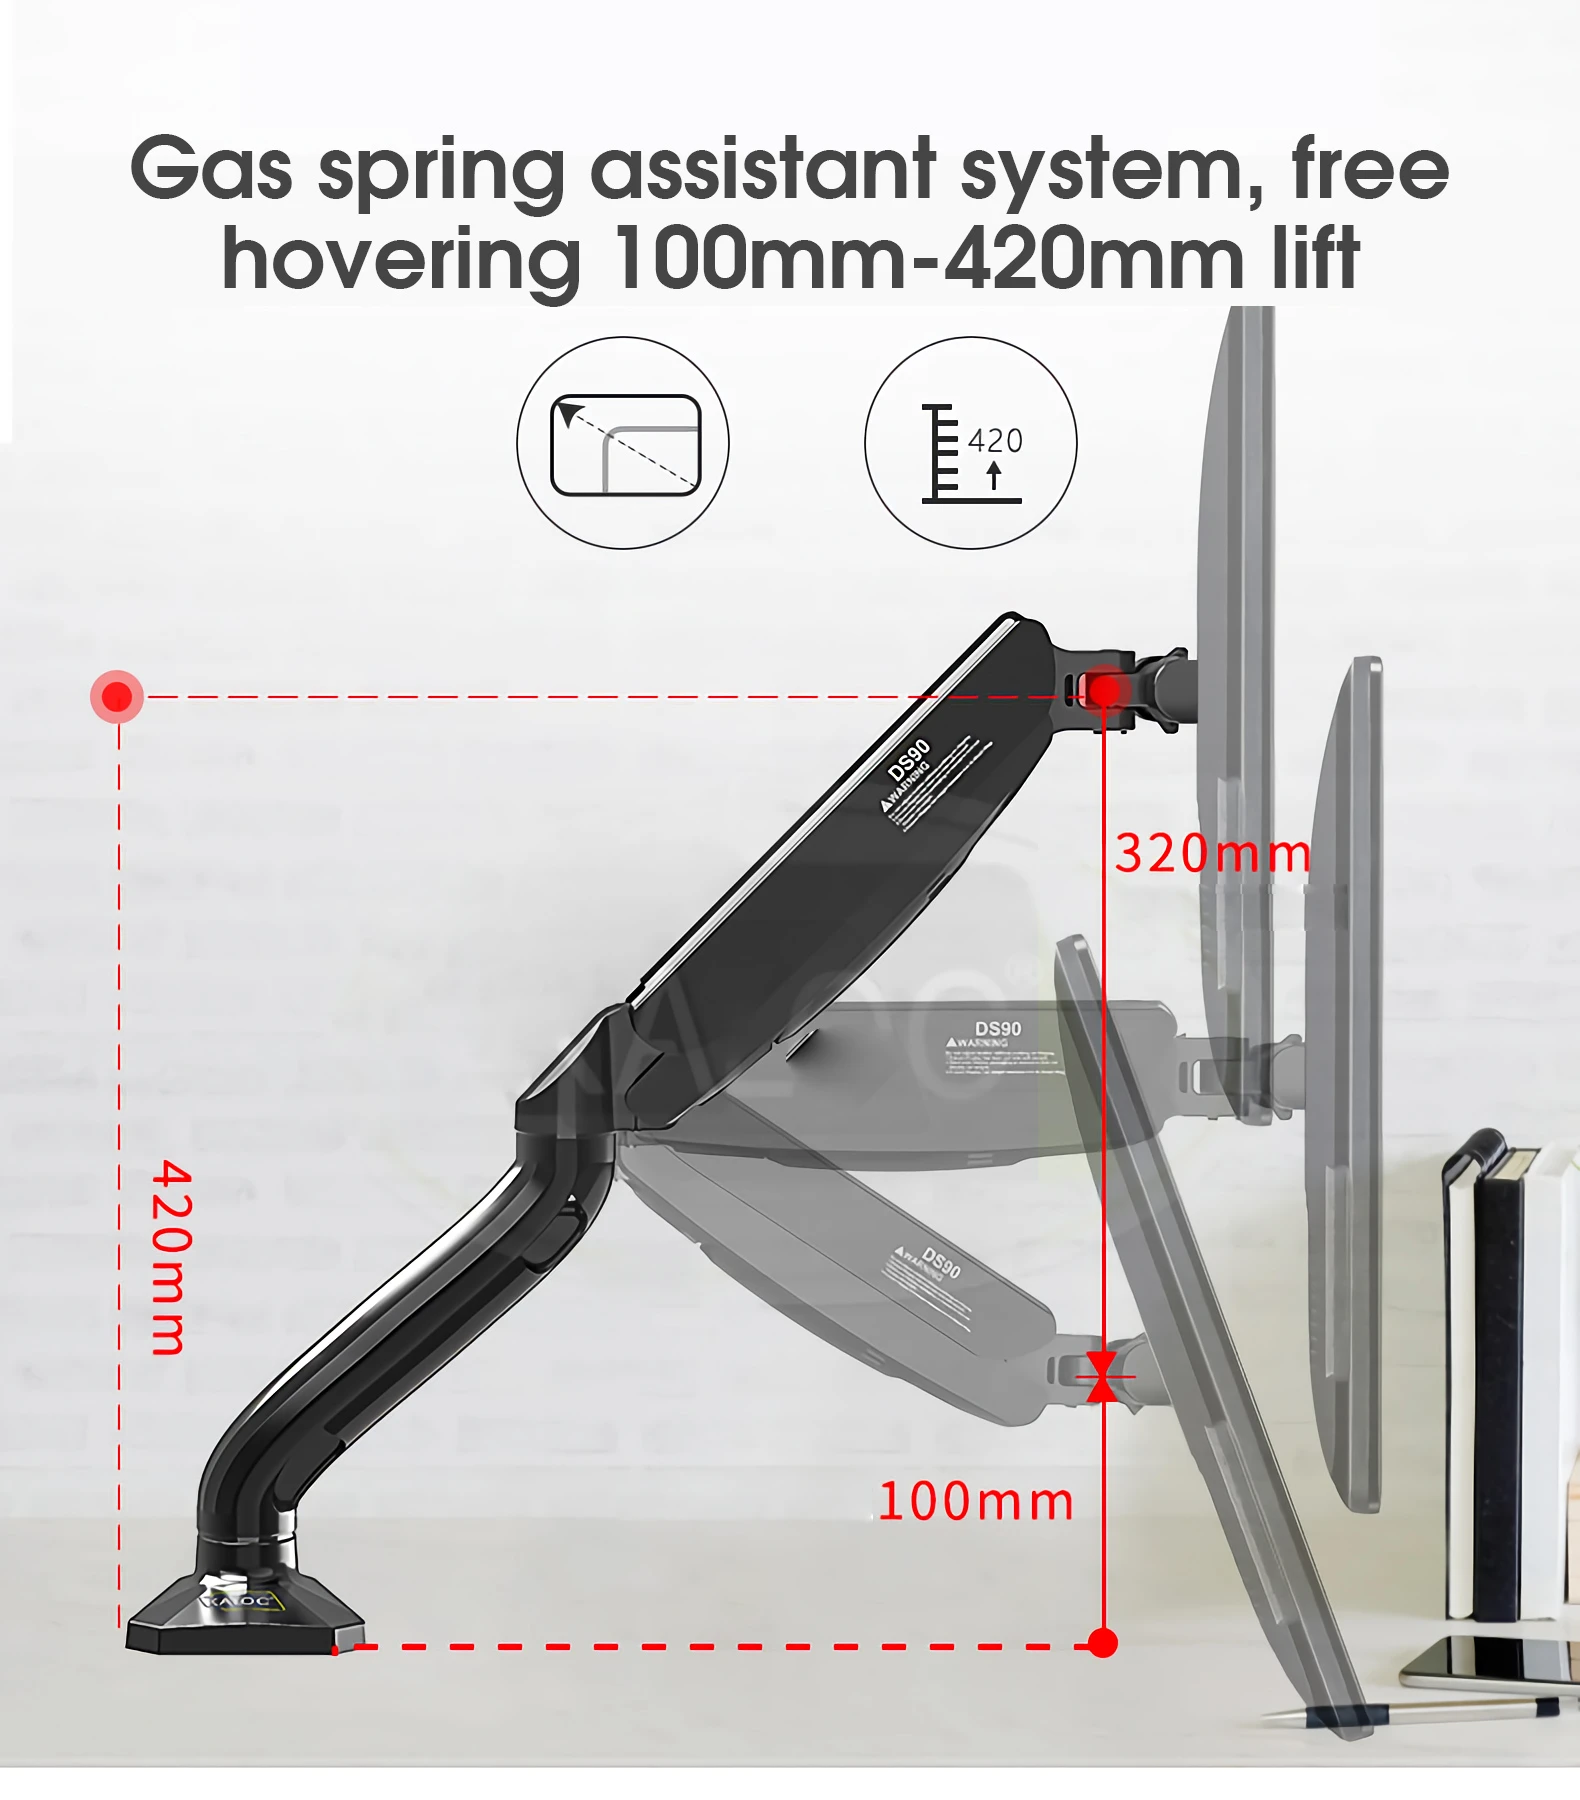 Gas spring assistant